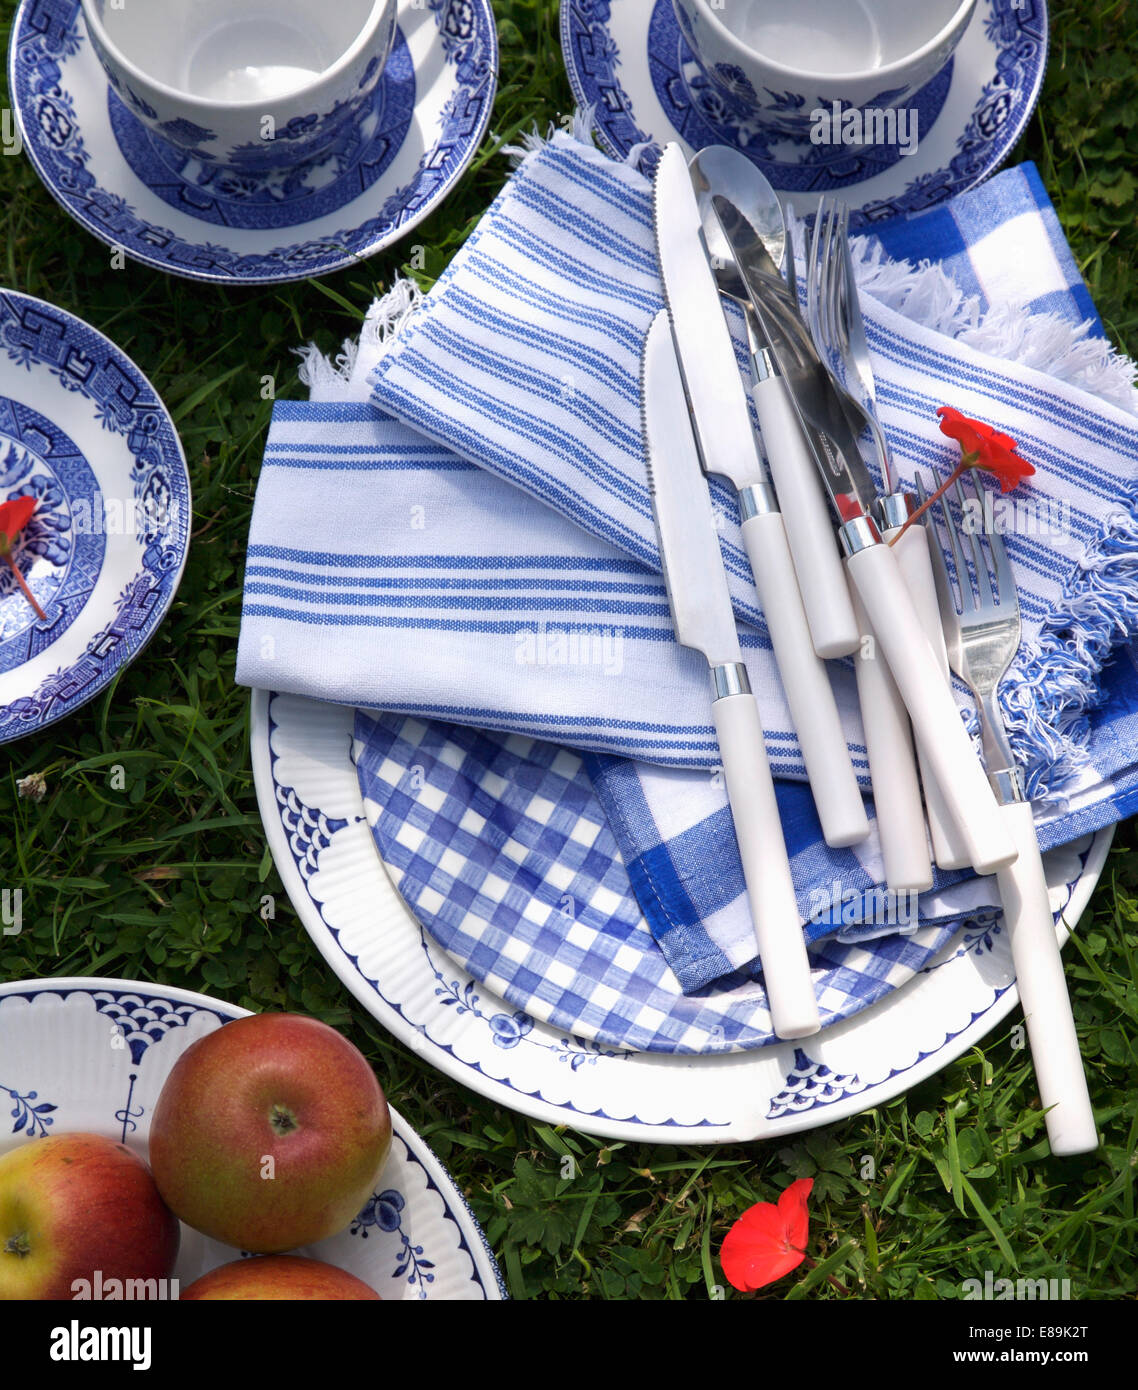 Close-up of white-handled cutlery and blue striped napkins with blue china Stock Photo